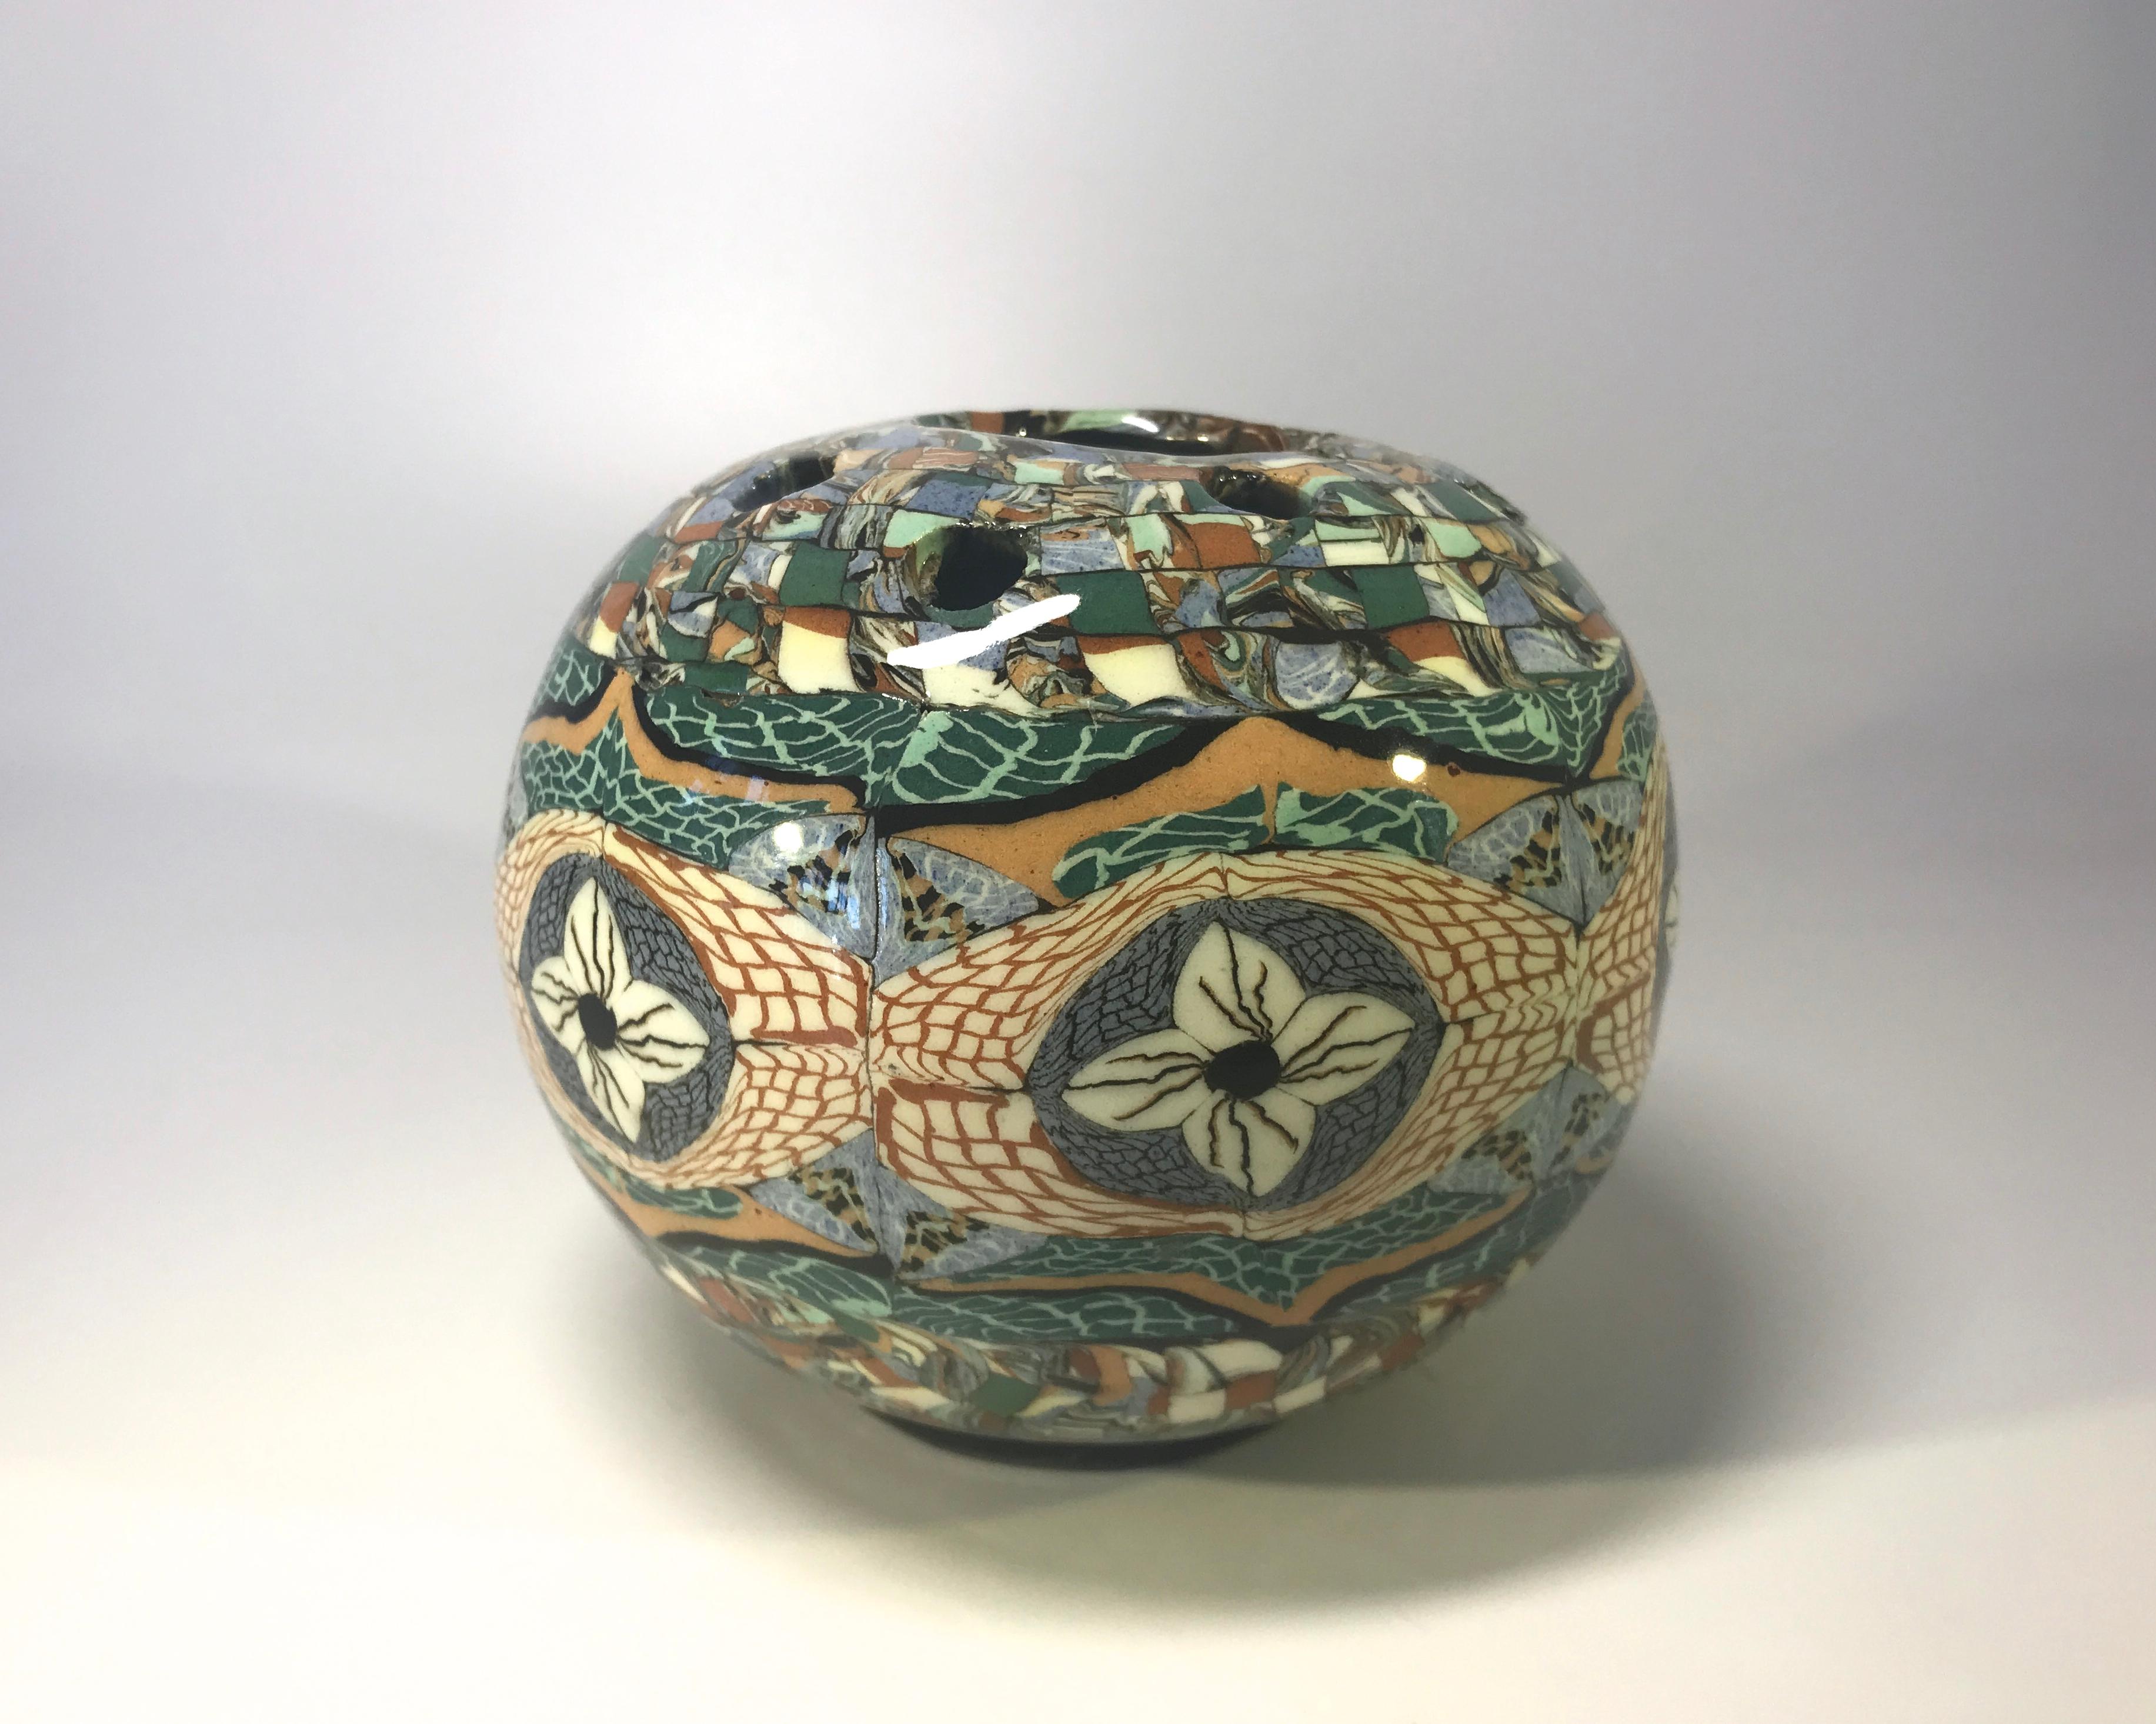 Jean Gerbino for Vallauris, France, ceramic glazed teal & blue mosaic posy potpourri vase 
An intriguing, tactile vase with superb mosaic pattern. 
Circa 1960's
Signed Gerbino to base
Measures: Height 4 inch, diameter 4.5 inch, 
In very good